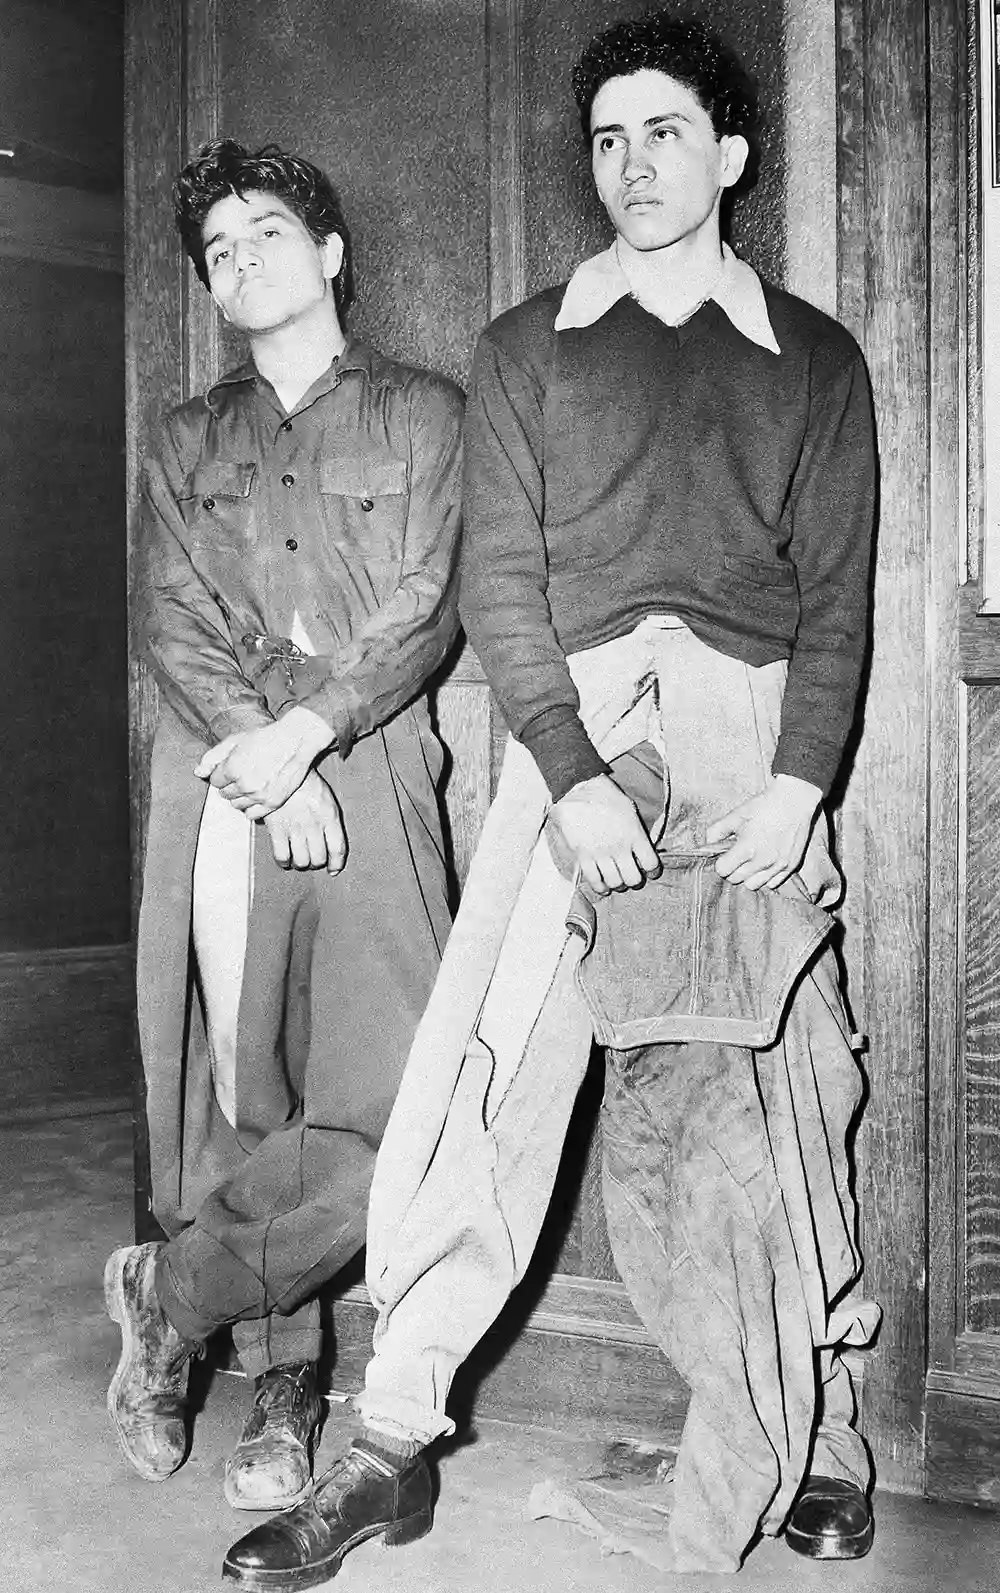 Noe Vasquez and Joe Vasquez are shown at the Los Angeles Police Department on June 10, 1943 after being attacked near Union Station by a gang of sailors, who had slashed their clothing.